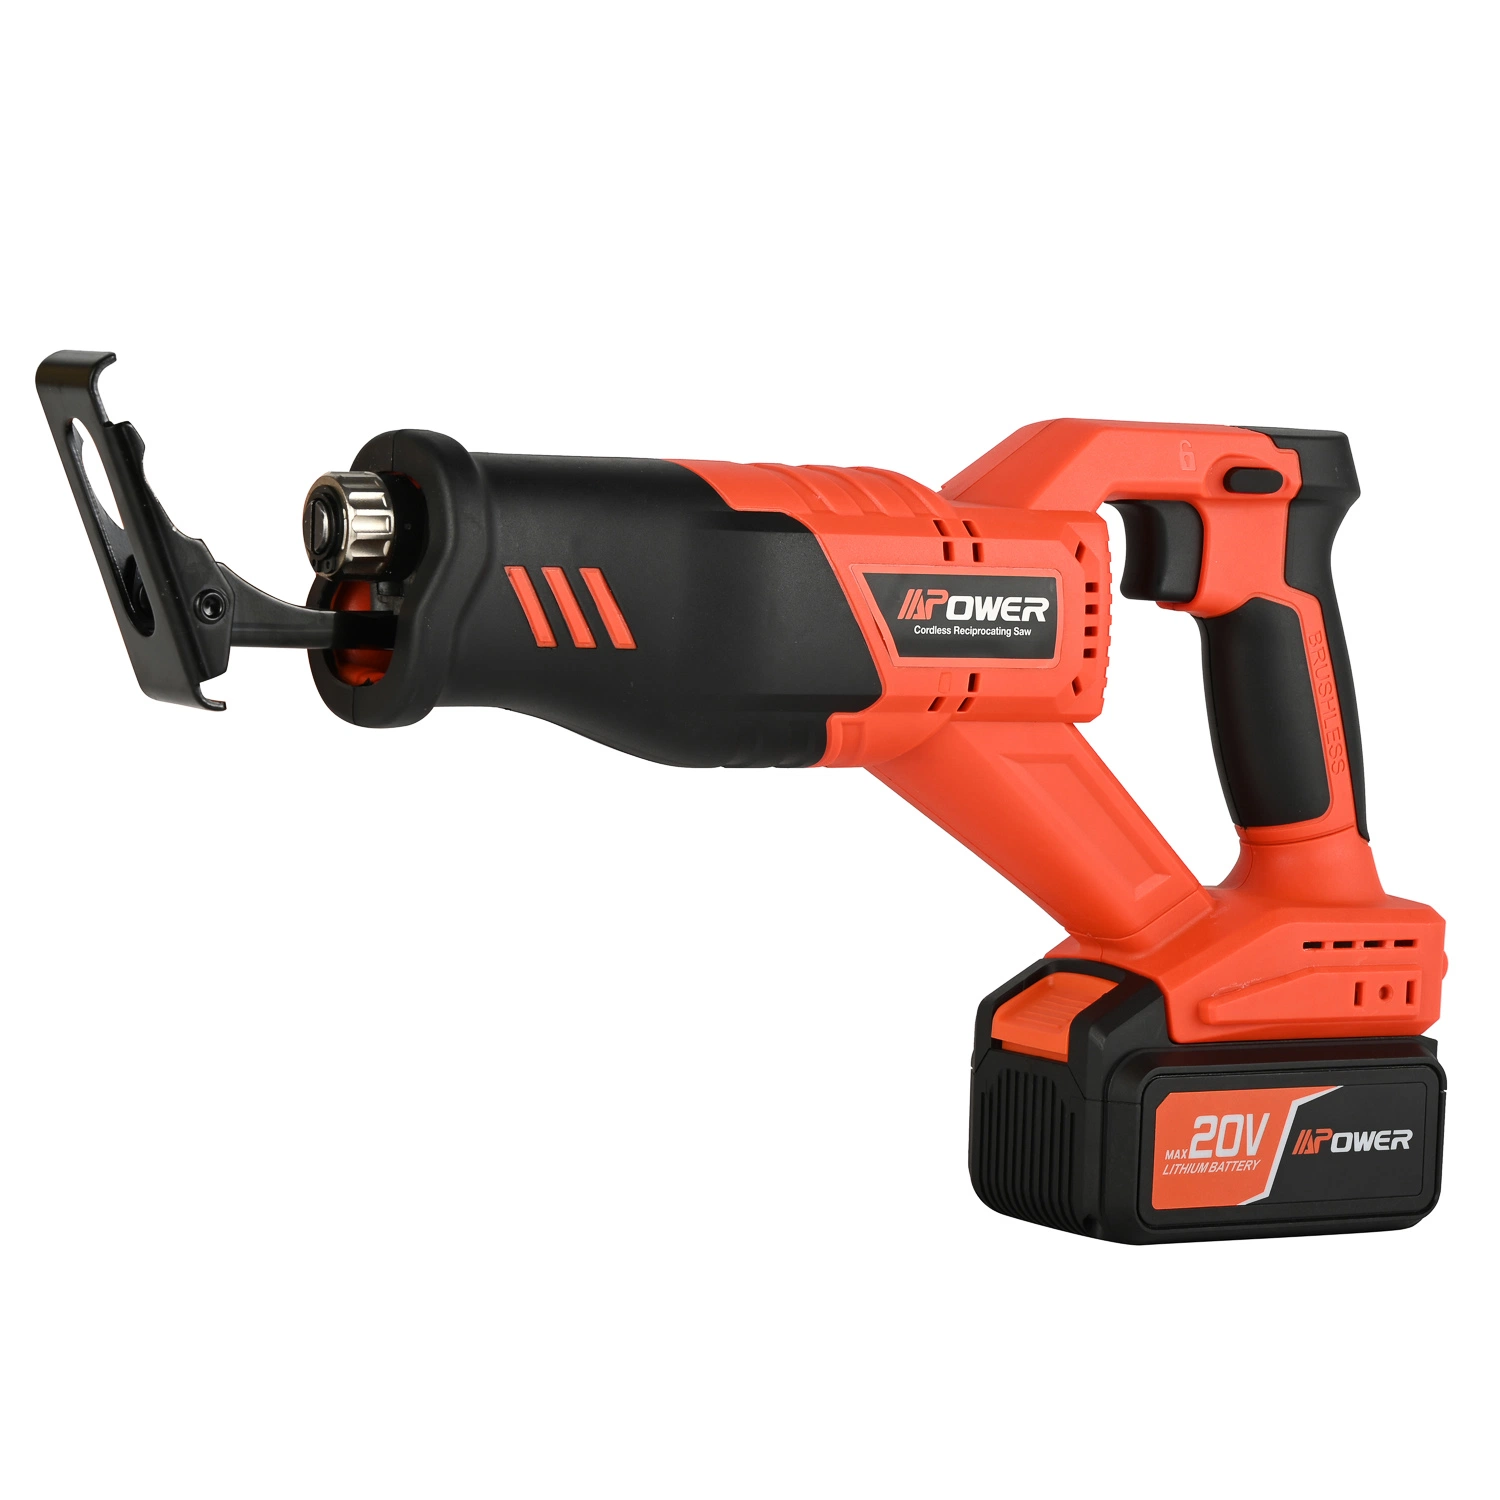 20V 22mm Rechargeable Brushless Cordless Recipro Saw Power Tools with CE Certificate